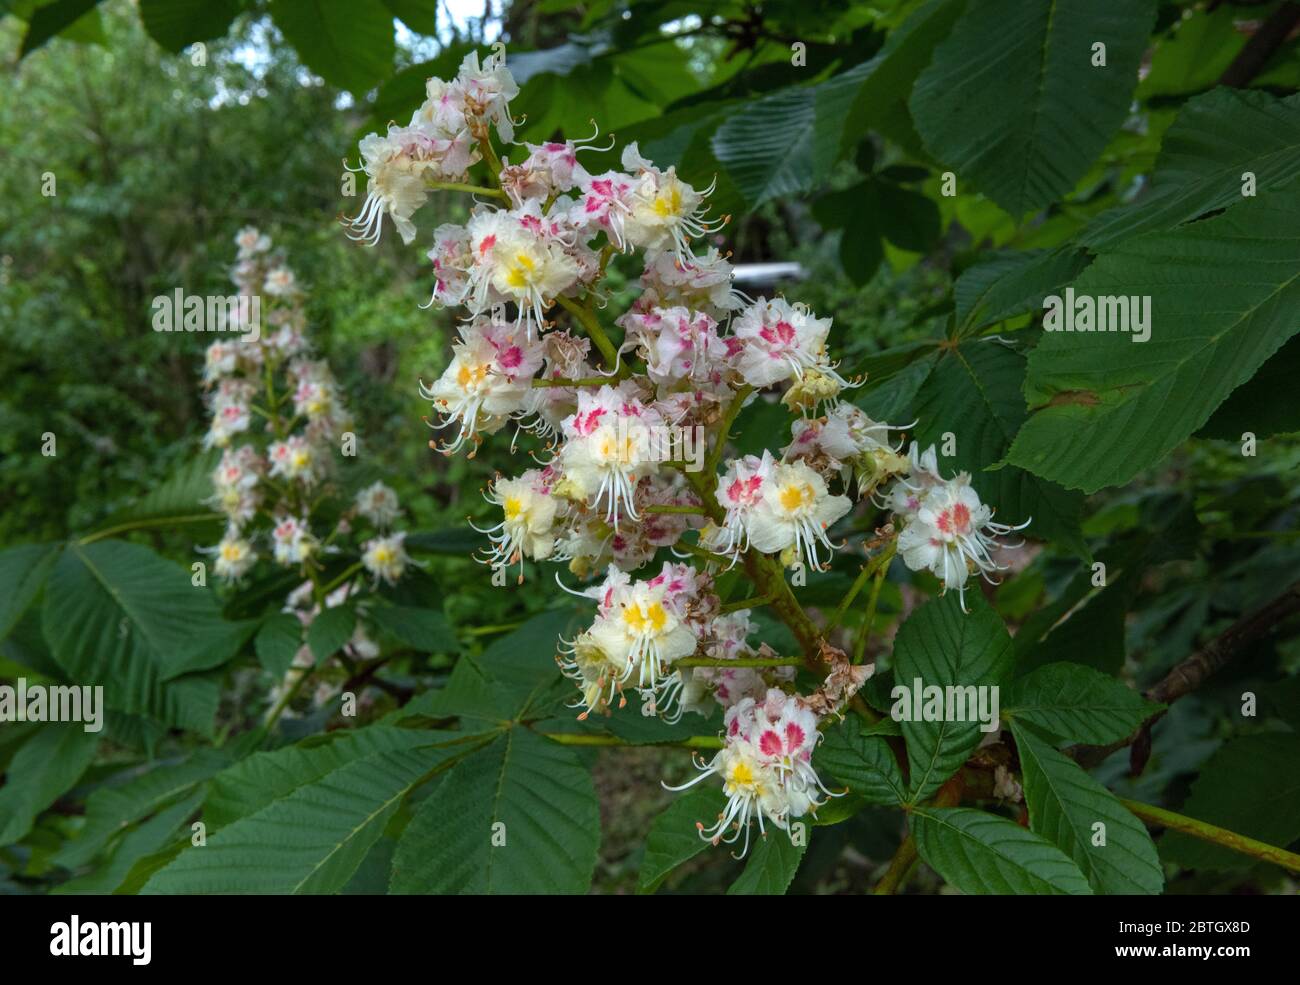 Beatifull blossoming horse chestnuts or Conker tree(Aesculus hippocastanum) Stock Photo